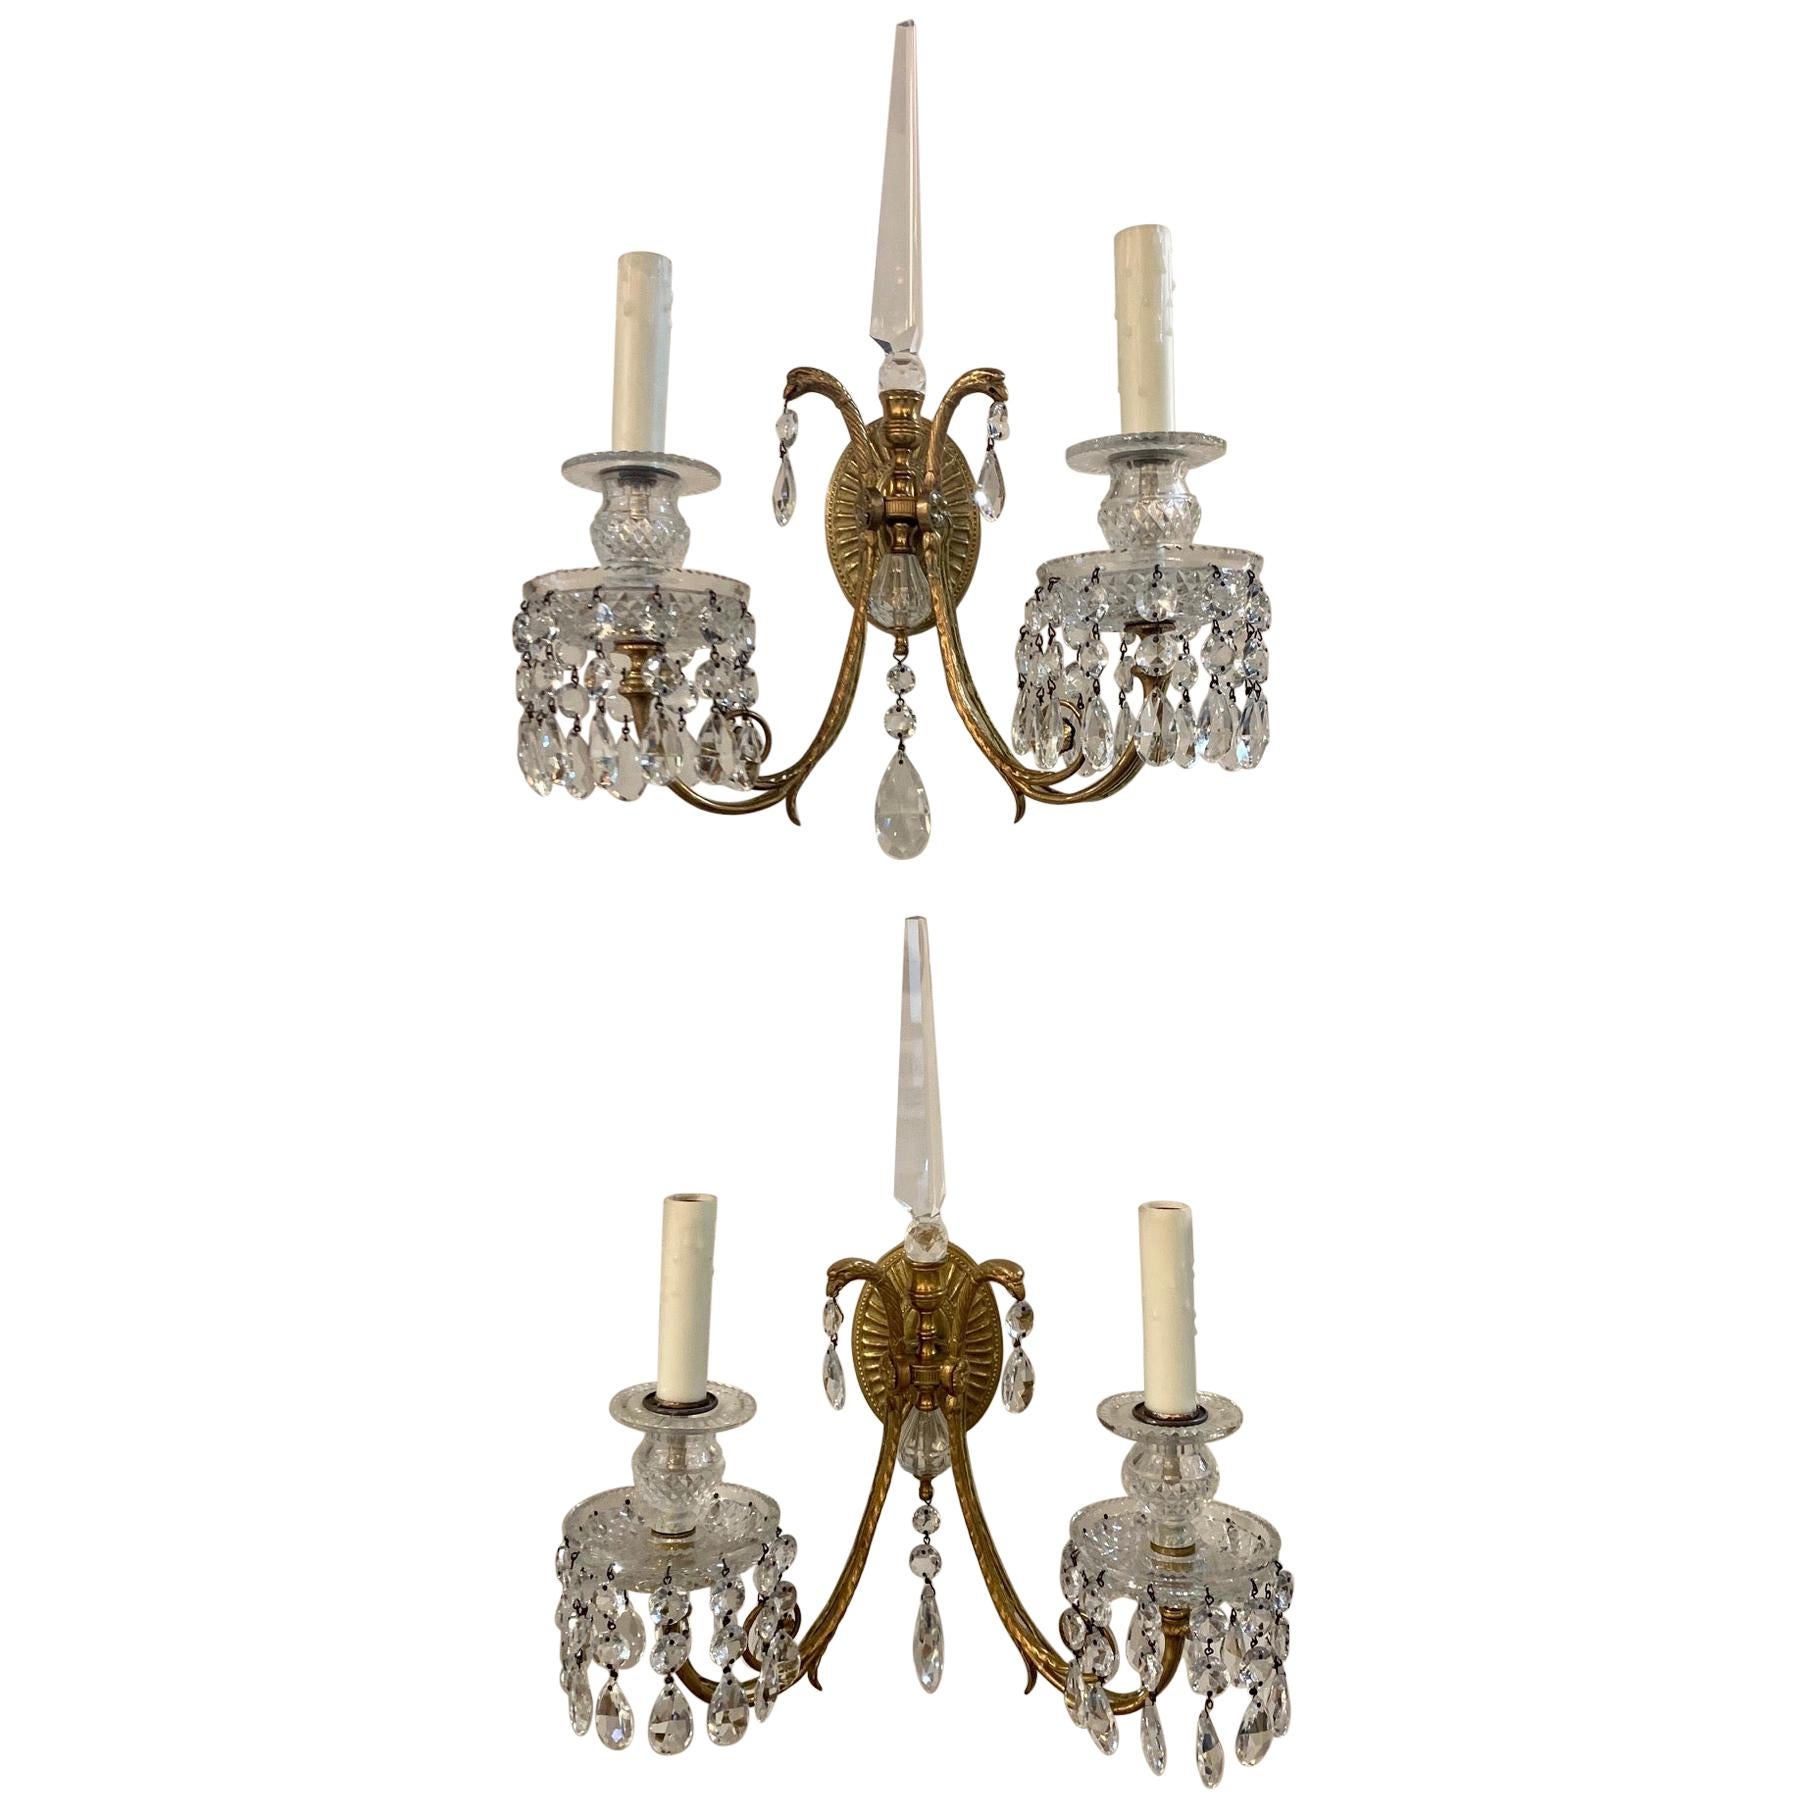 19th Century French Neoclassical Gilt Bronze and Crystal Sconces